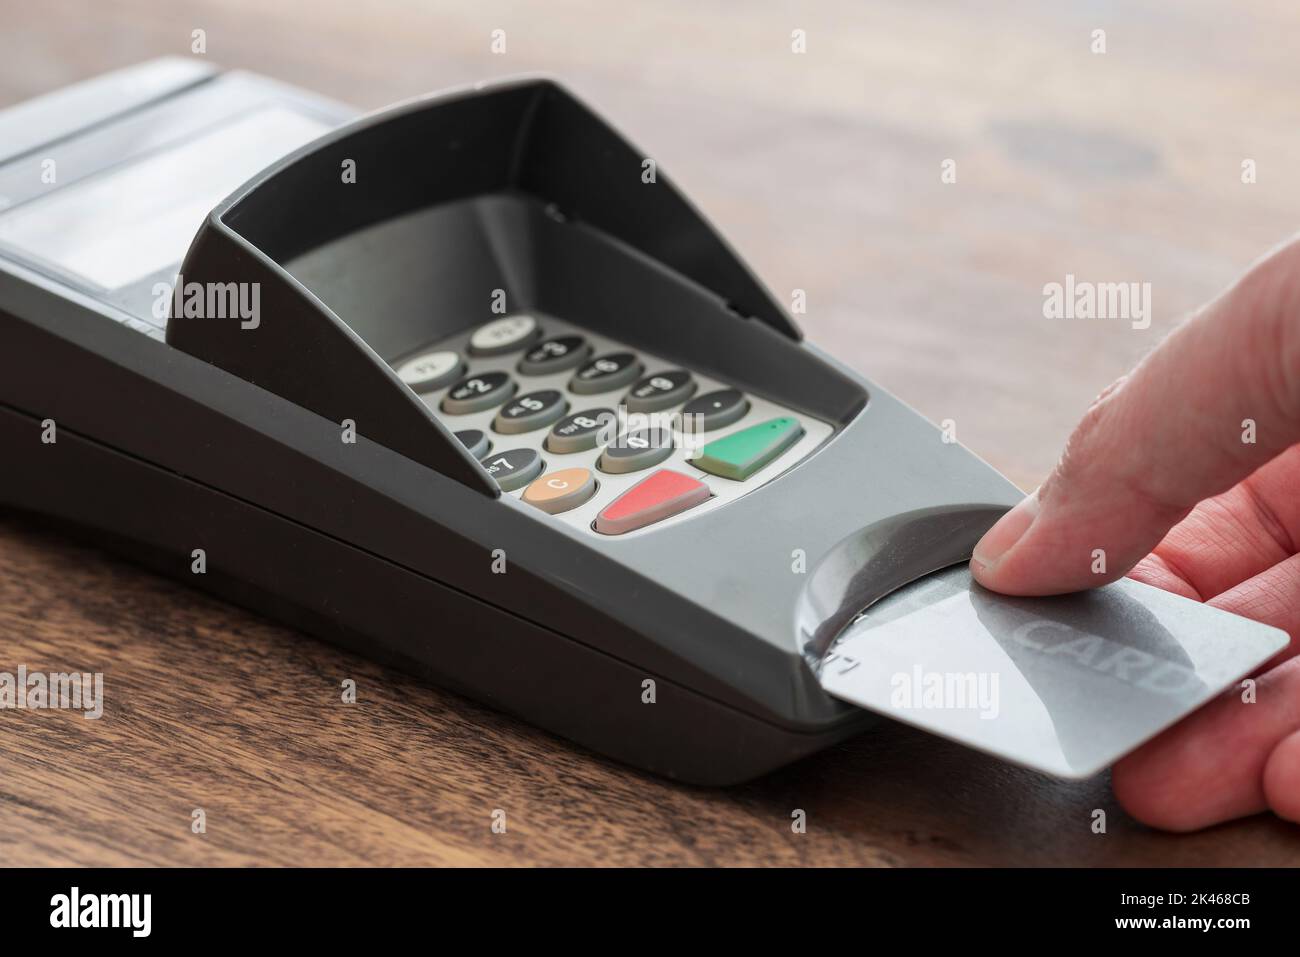 close-up view of person insert credit card or debit card into card reader, cashless payment concept Stock Photo